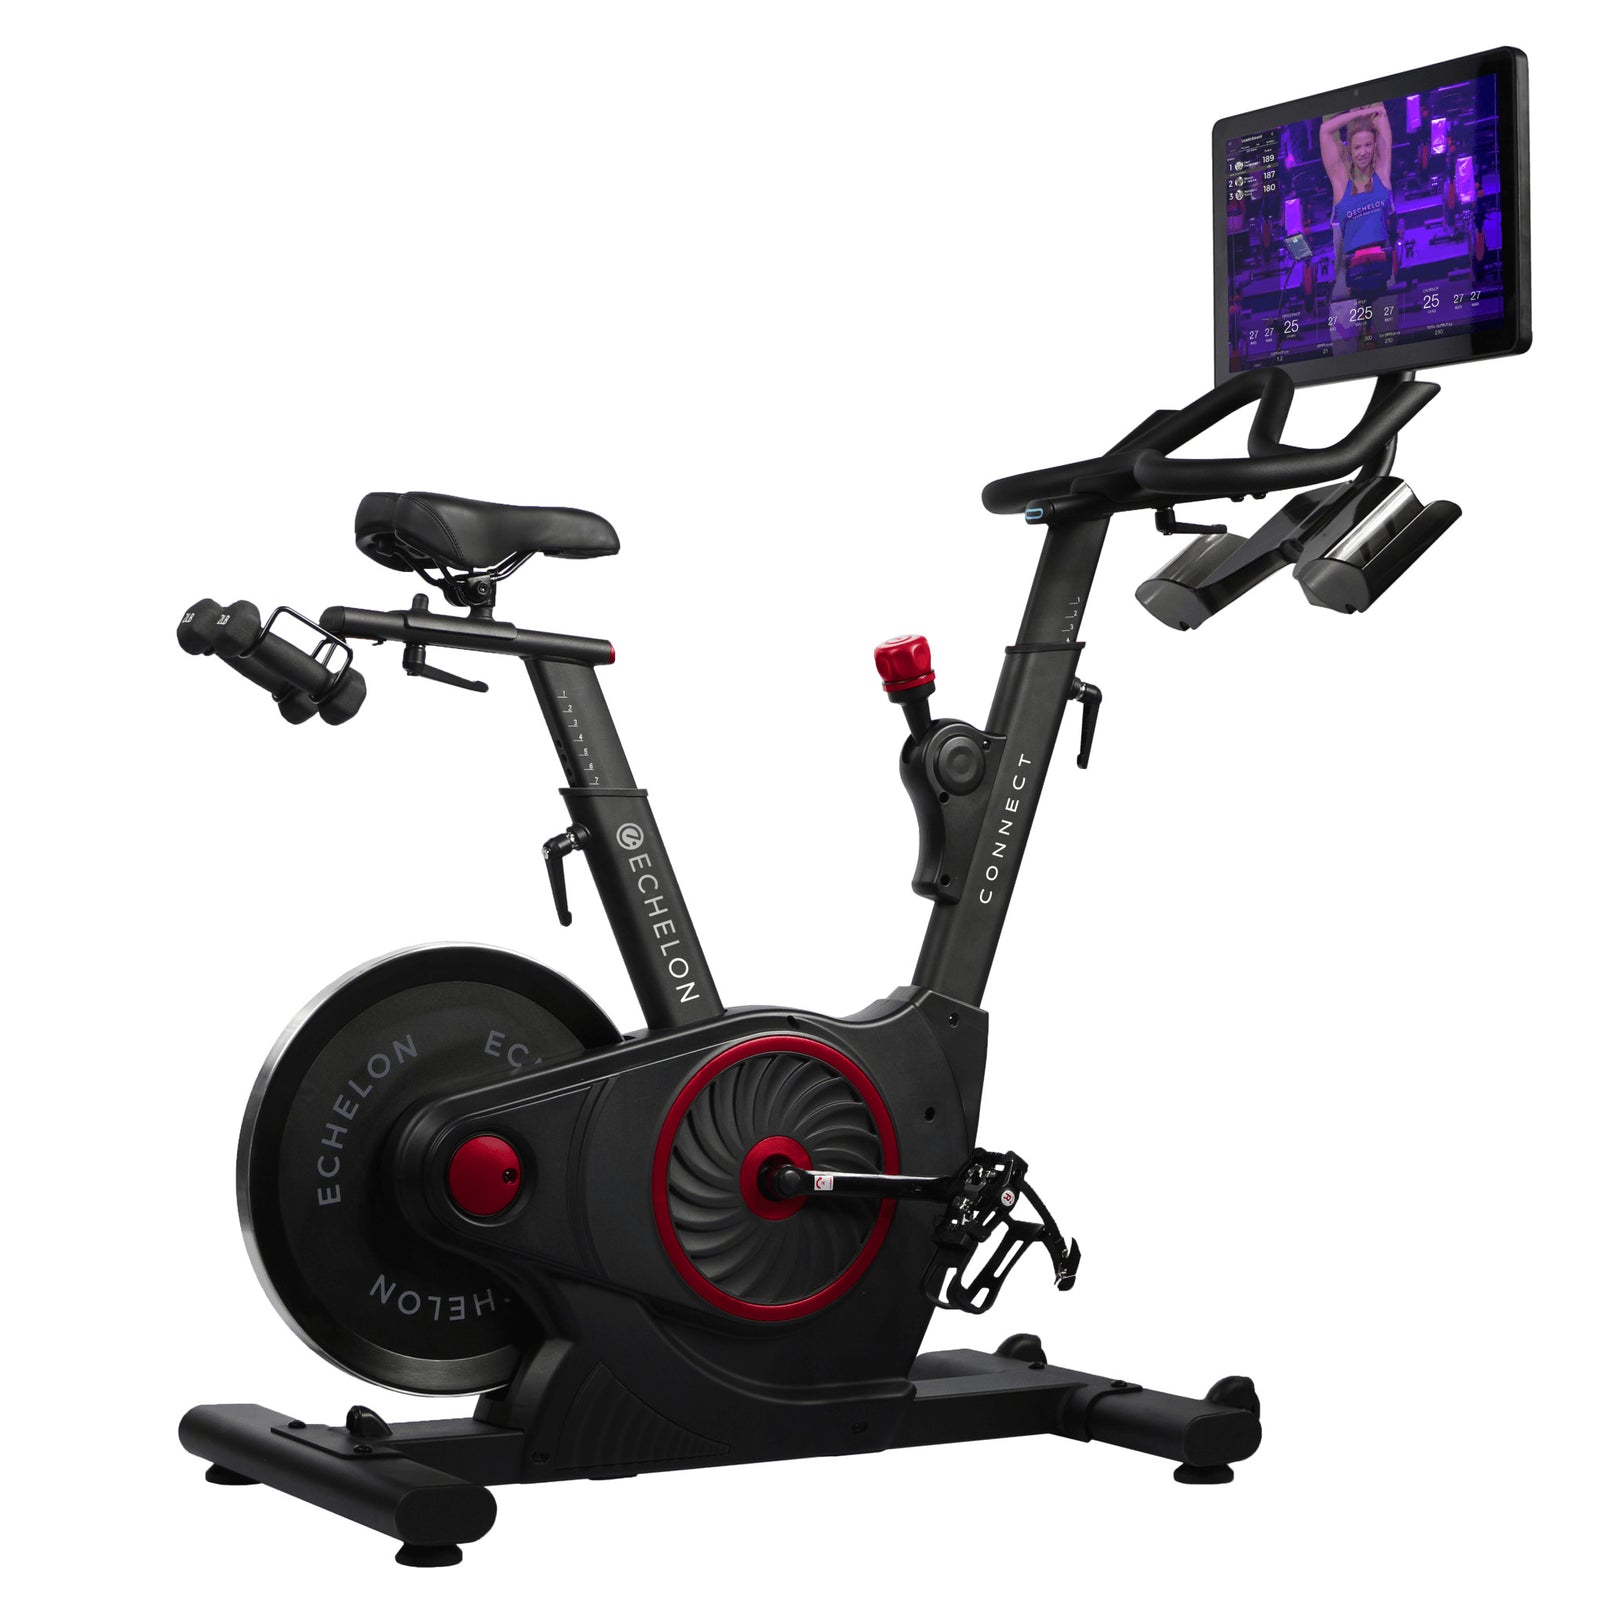 Indoor Cycle - Fitness Experience